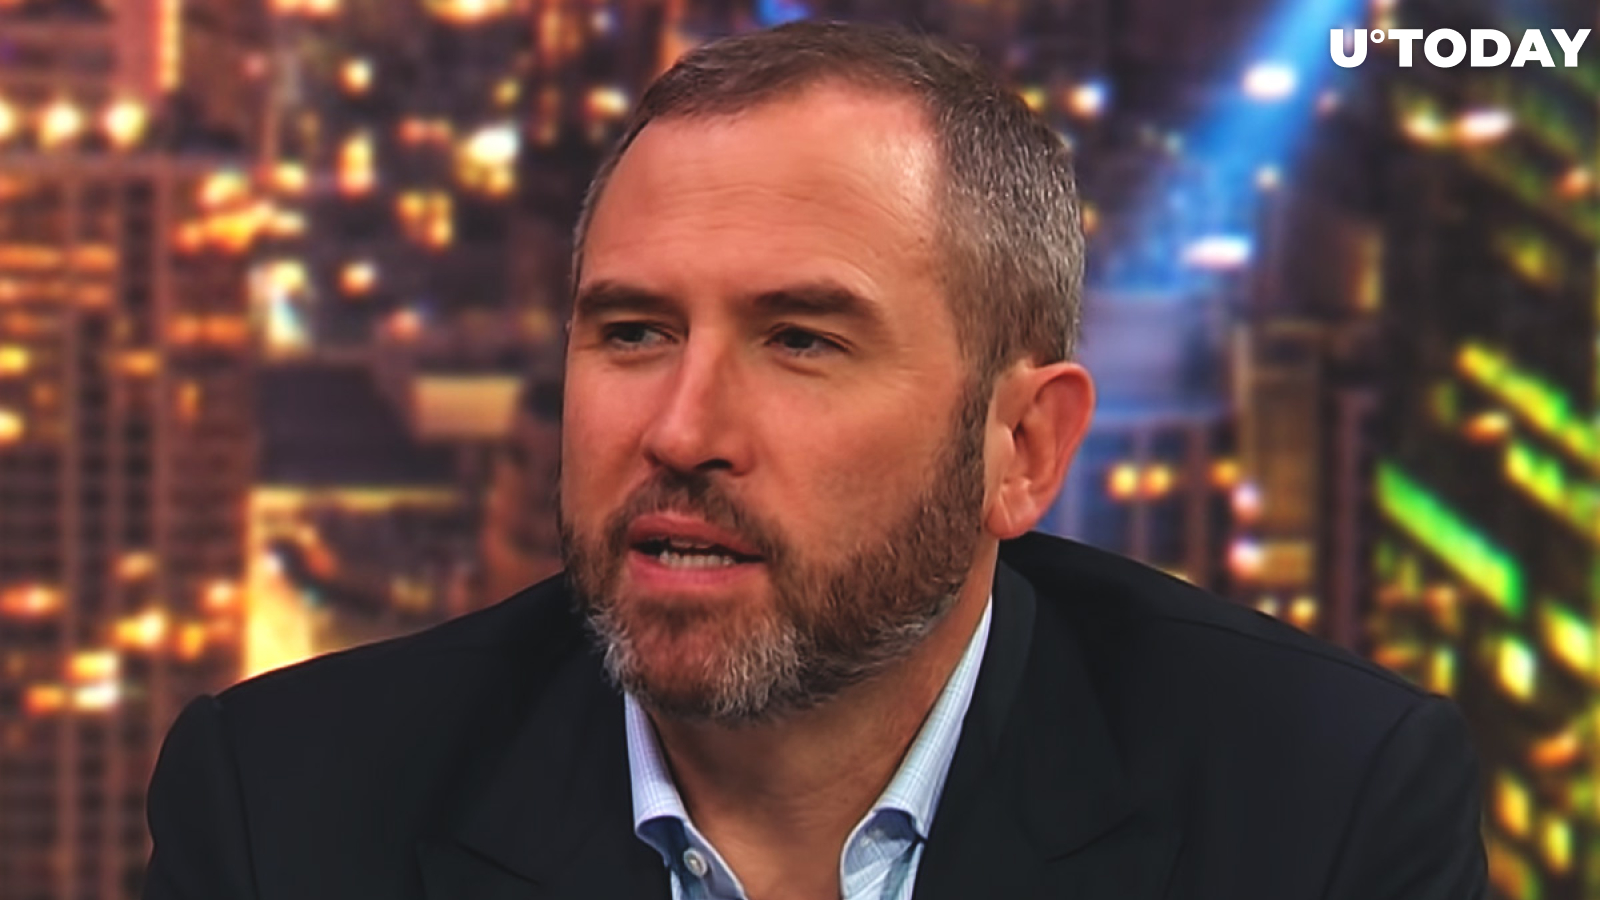 Ripple CEO Lashes Out at Coindesk Over "Embarrassing" Article